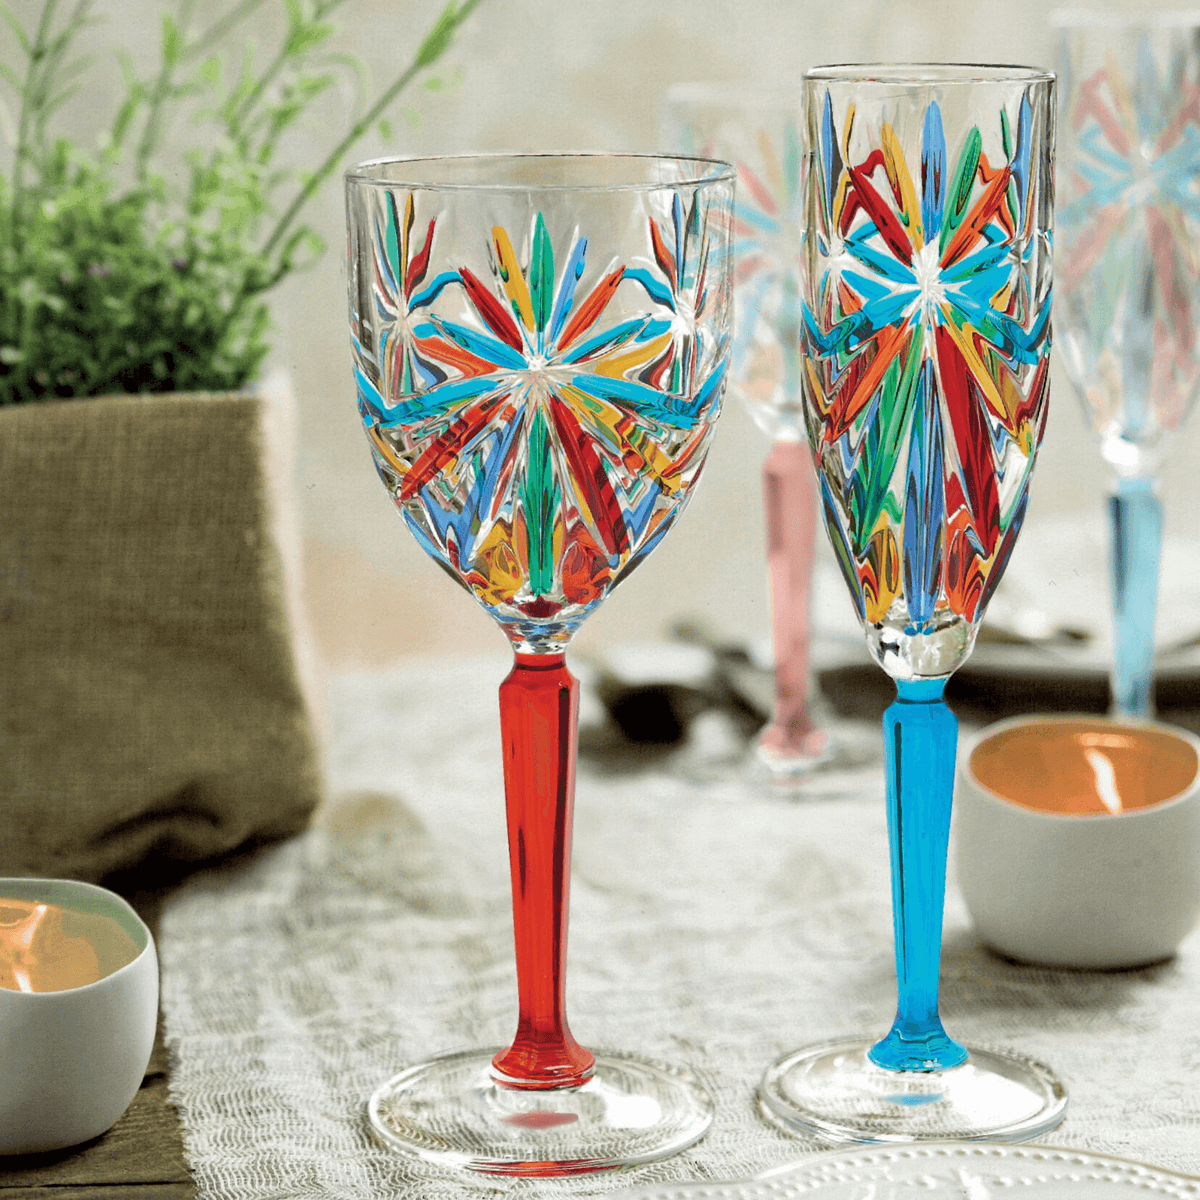 Starburst Champagne Flutes, Hand Painted Italian Crystal, Made in Italy at MyItalianDecor